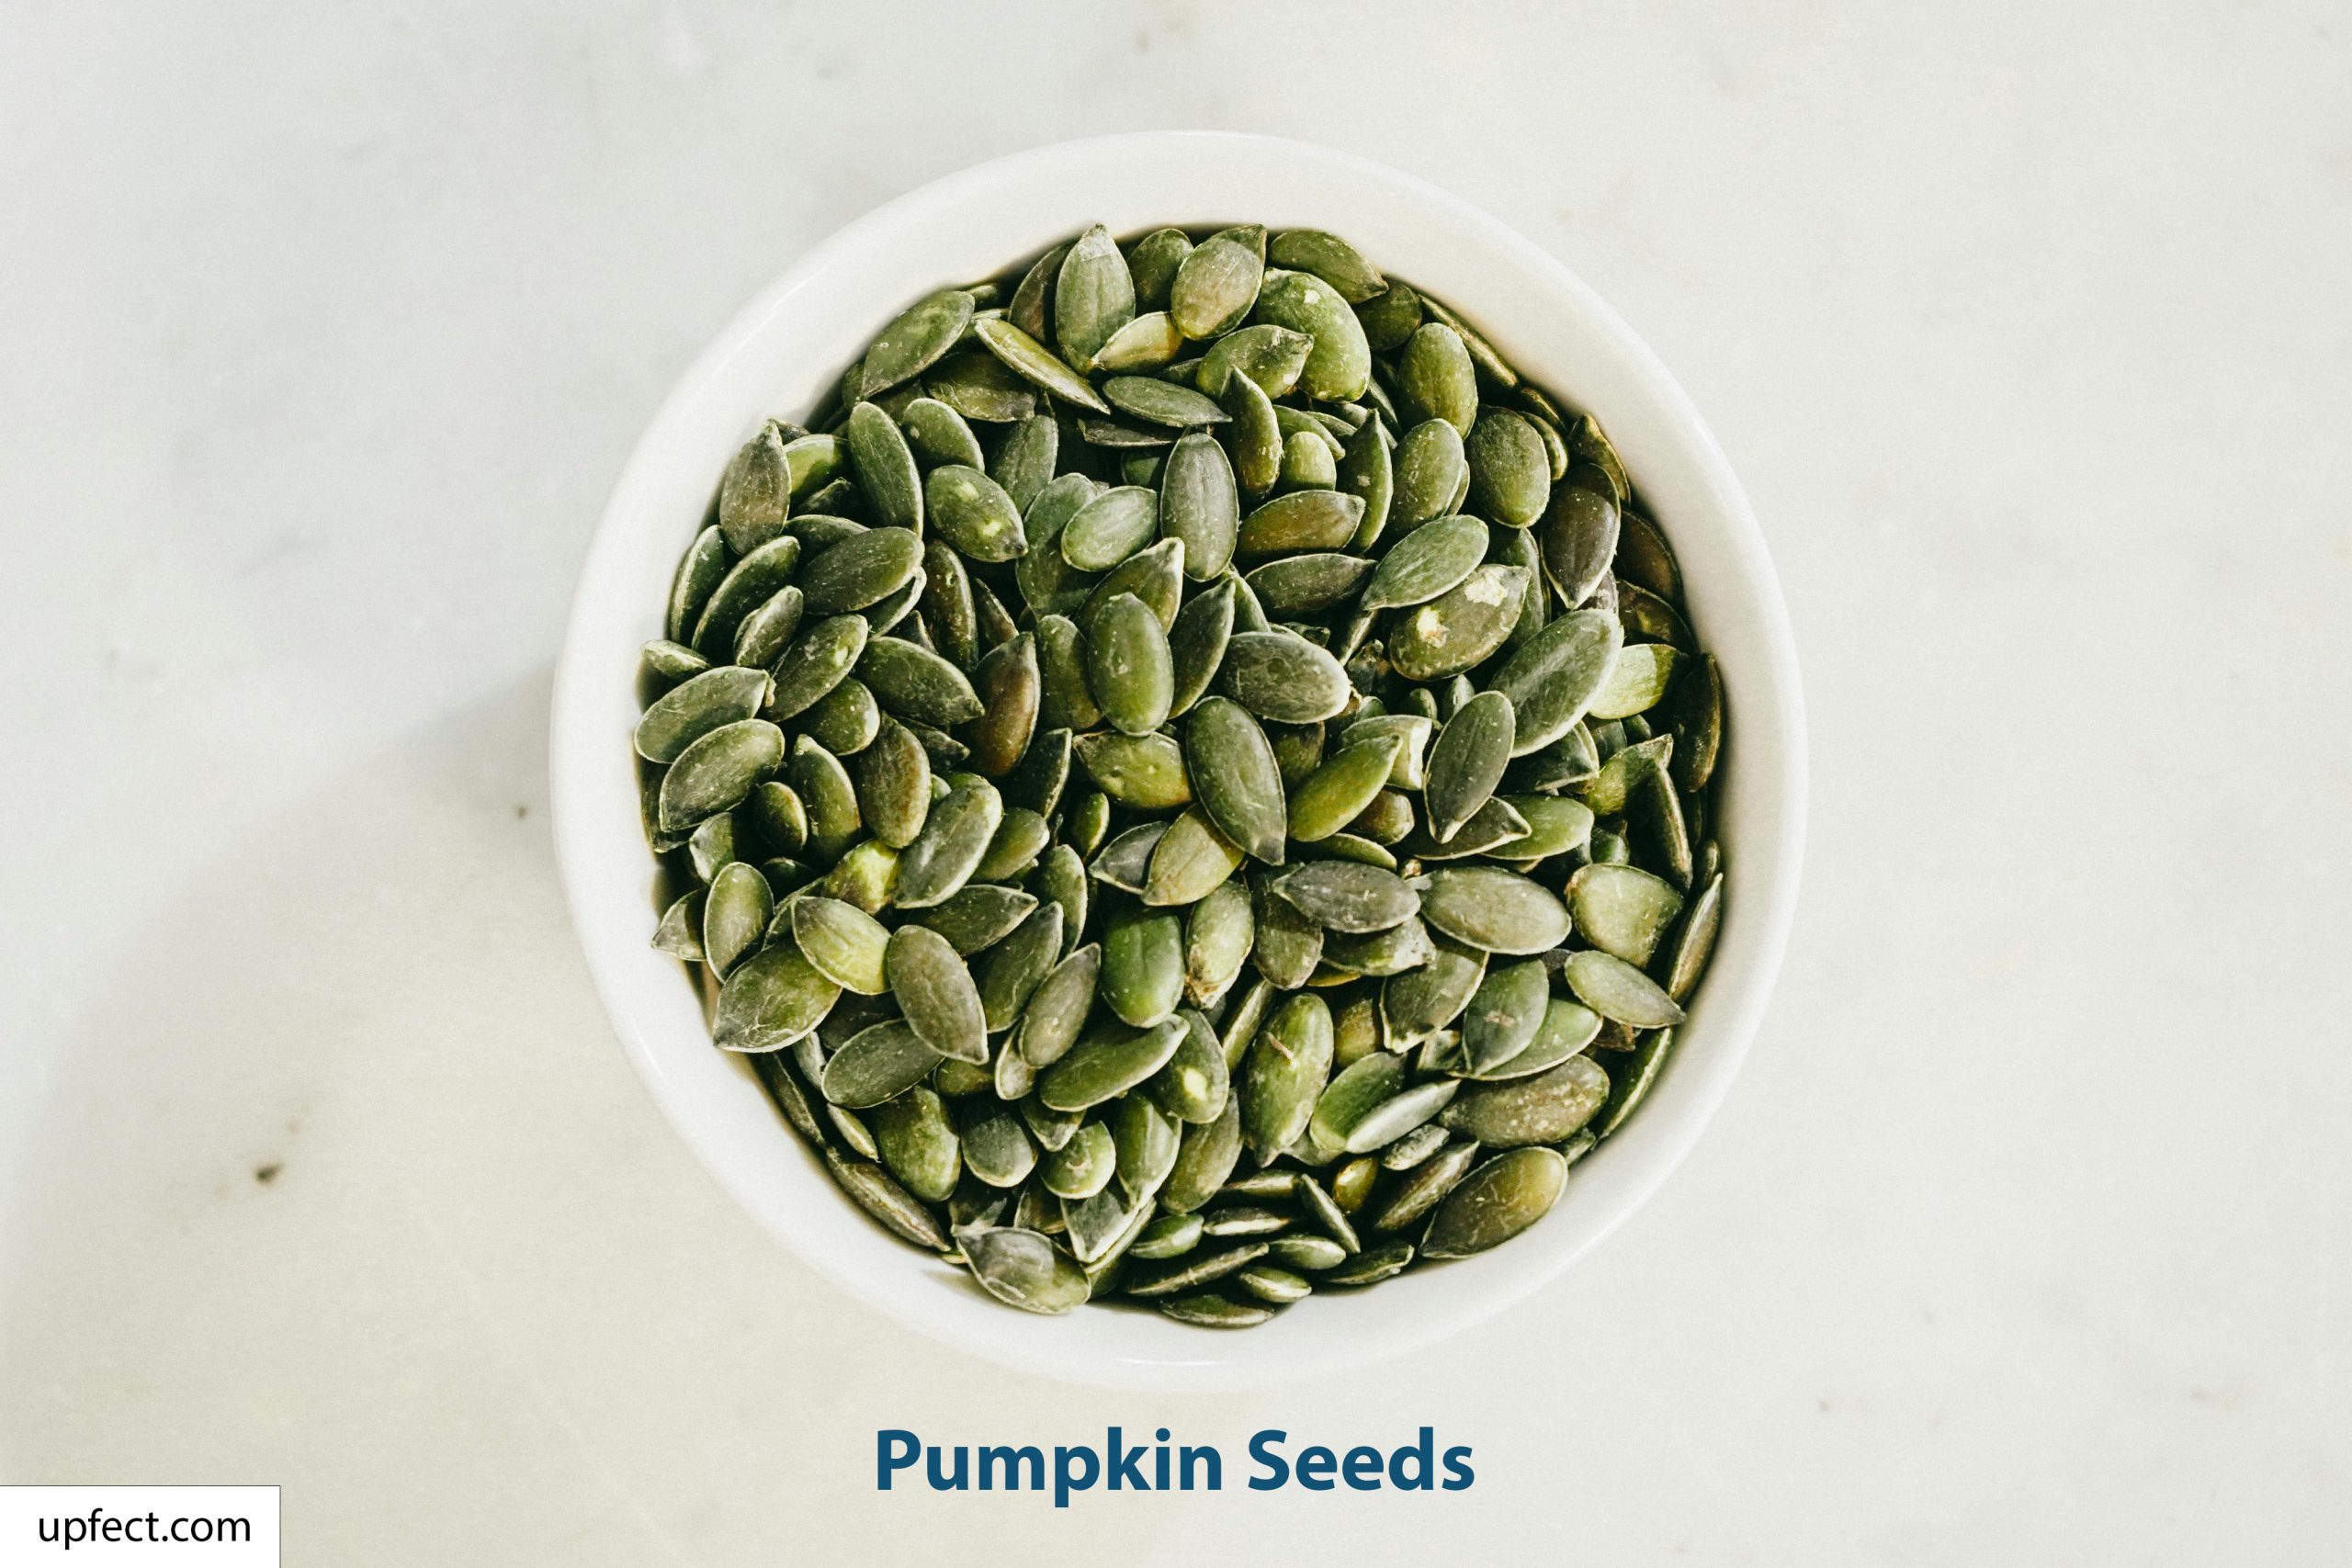 Pumpkin Seeds is the Best Food for Sperm Recovery